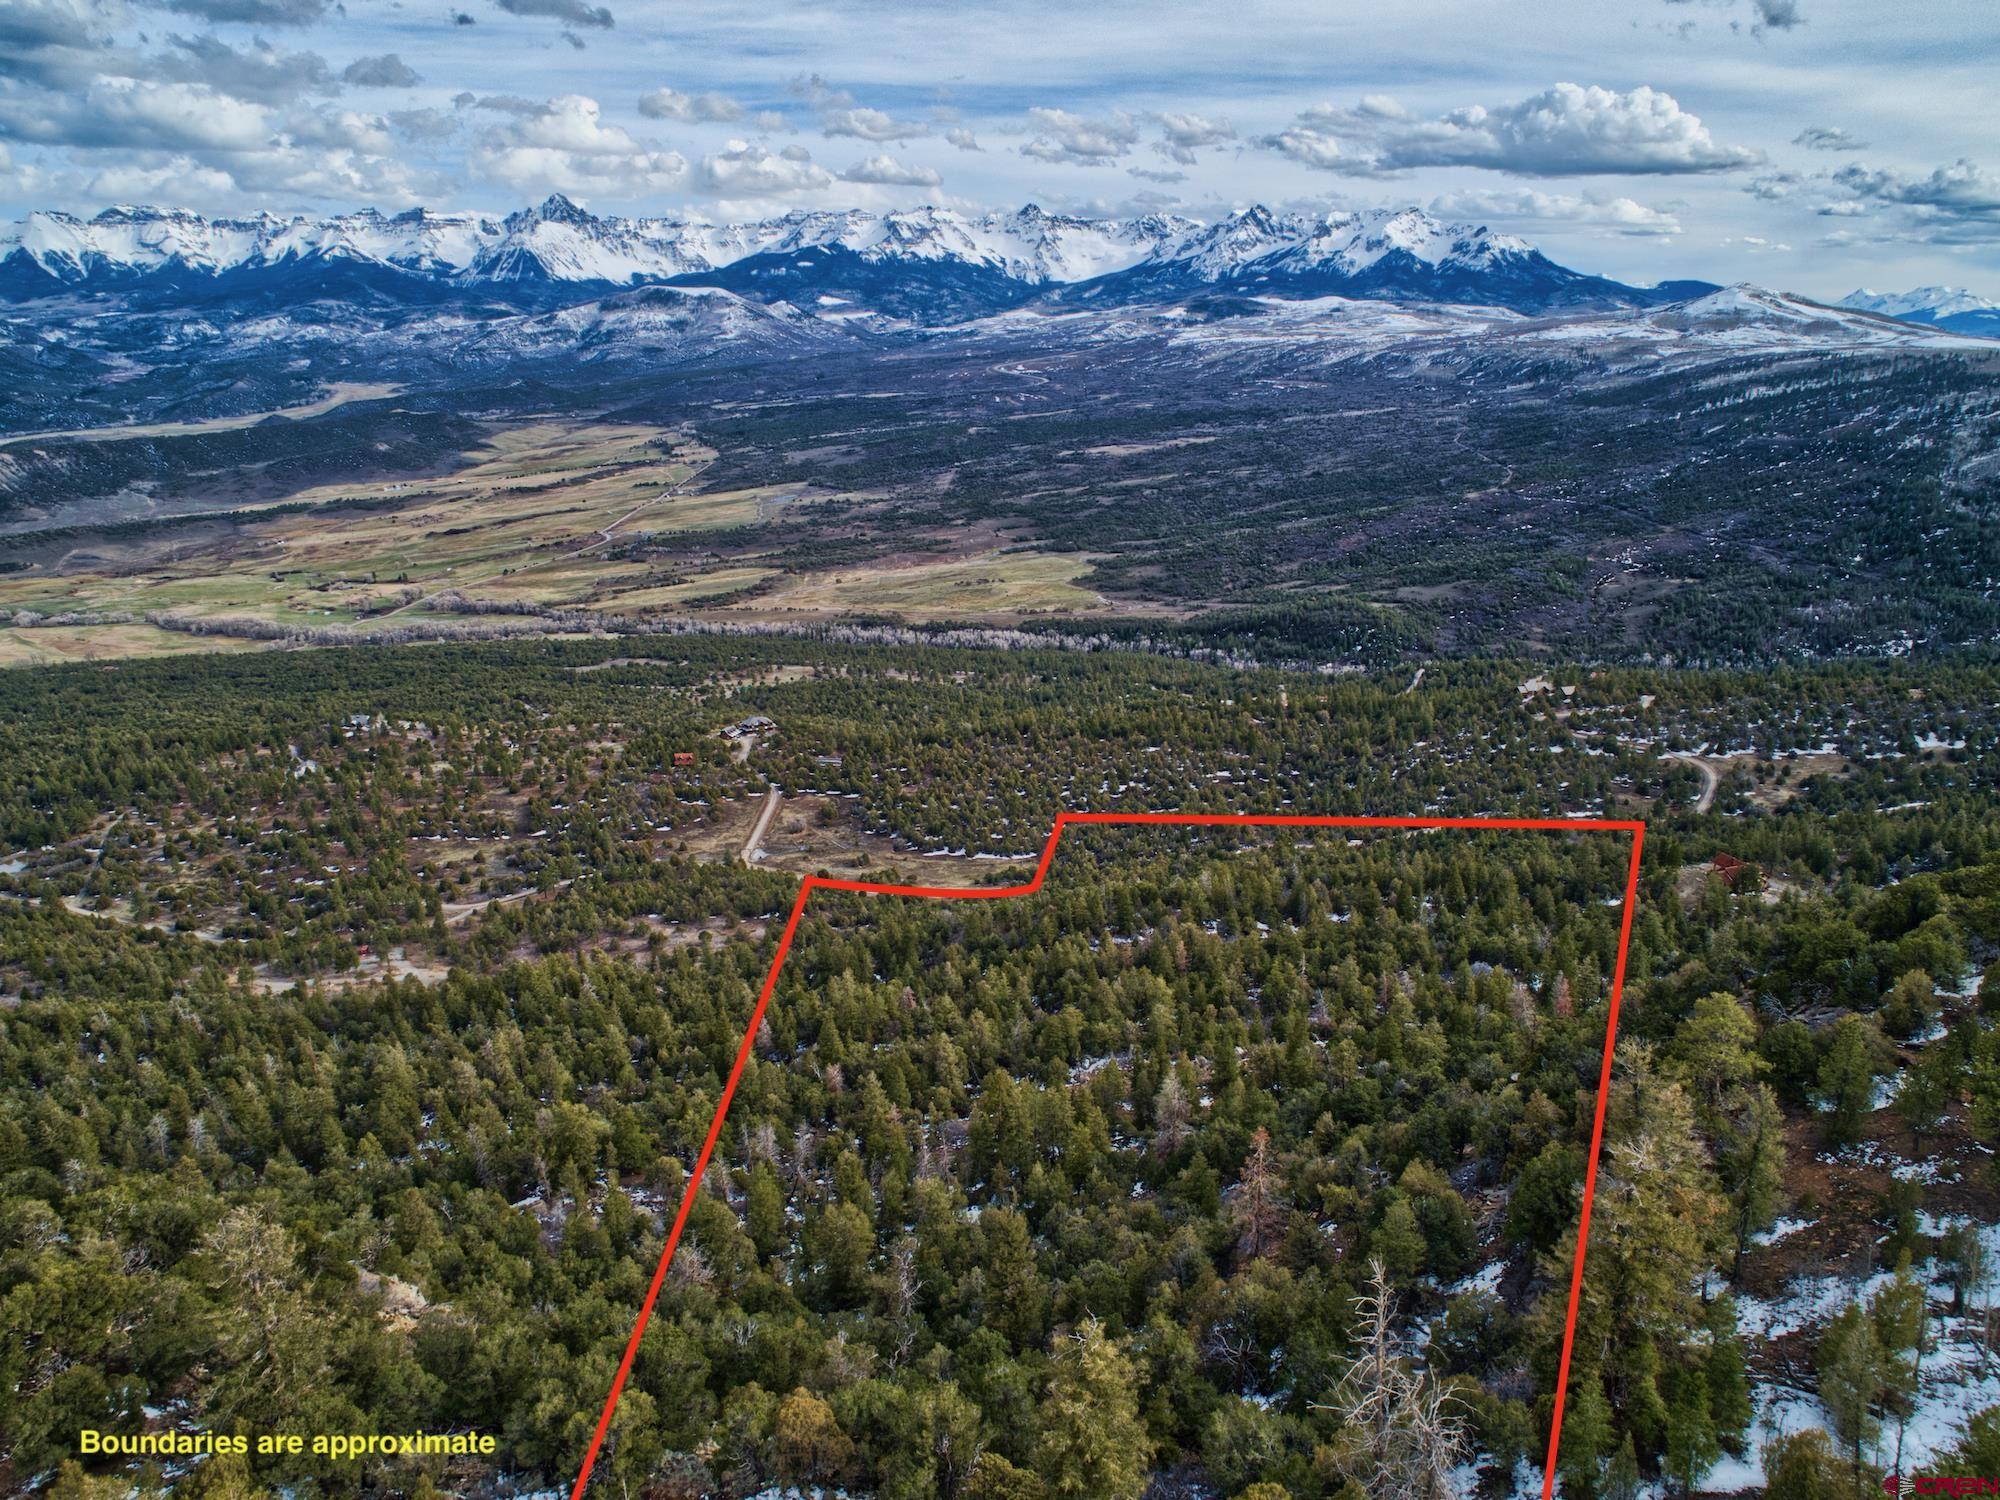 Photo of Tbd Lot 7 Old Relay Rd in Ridgway, CO